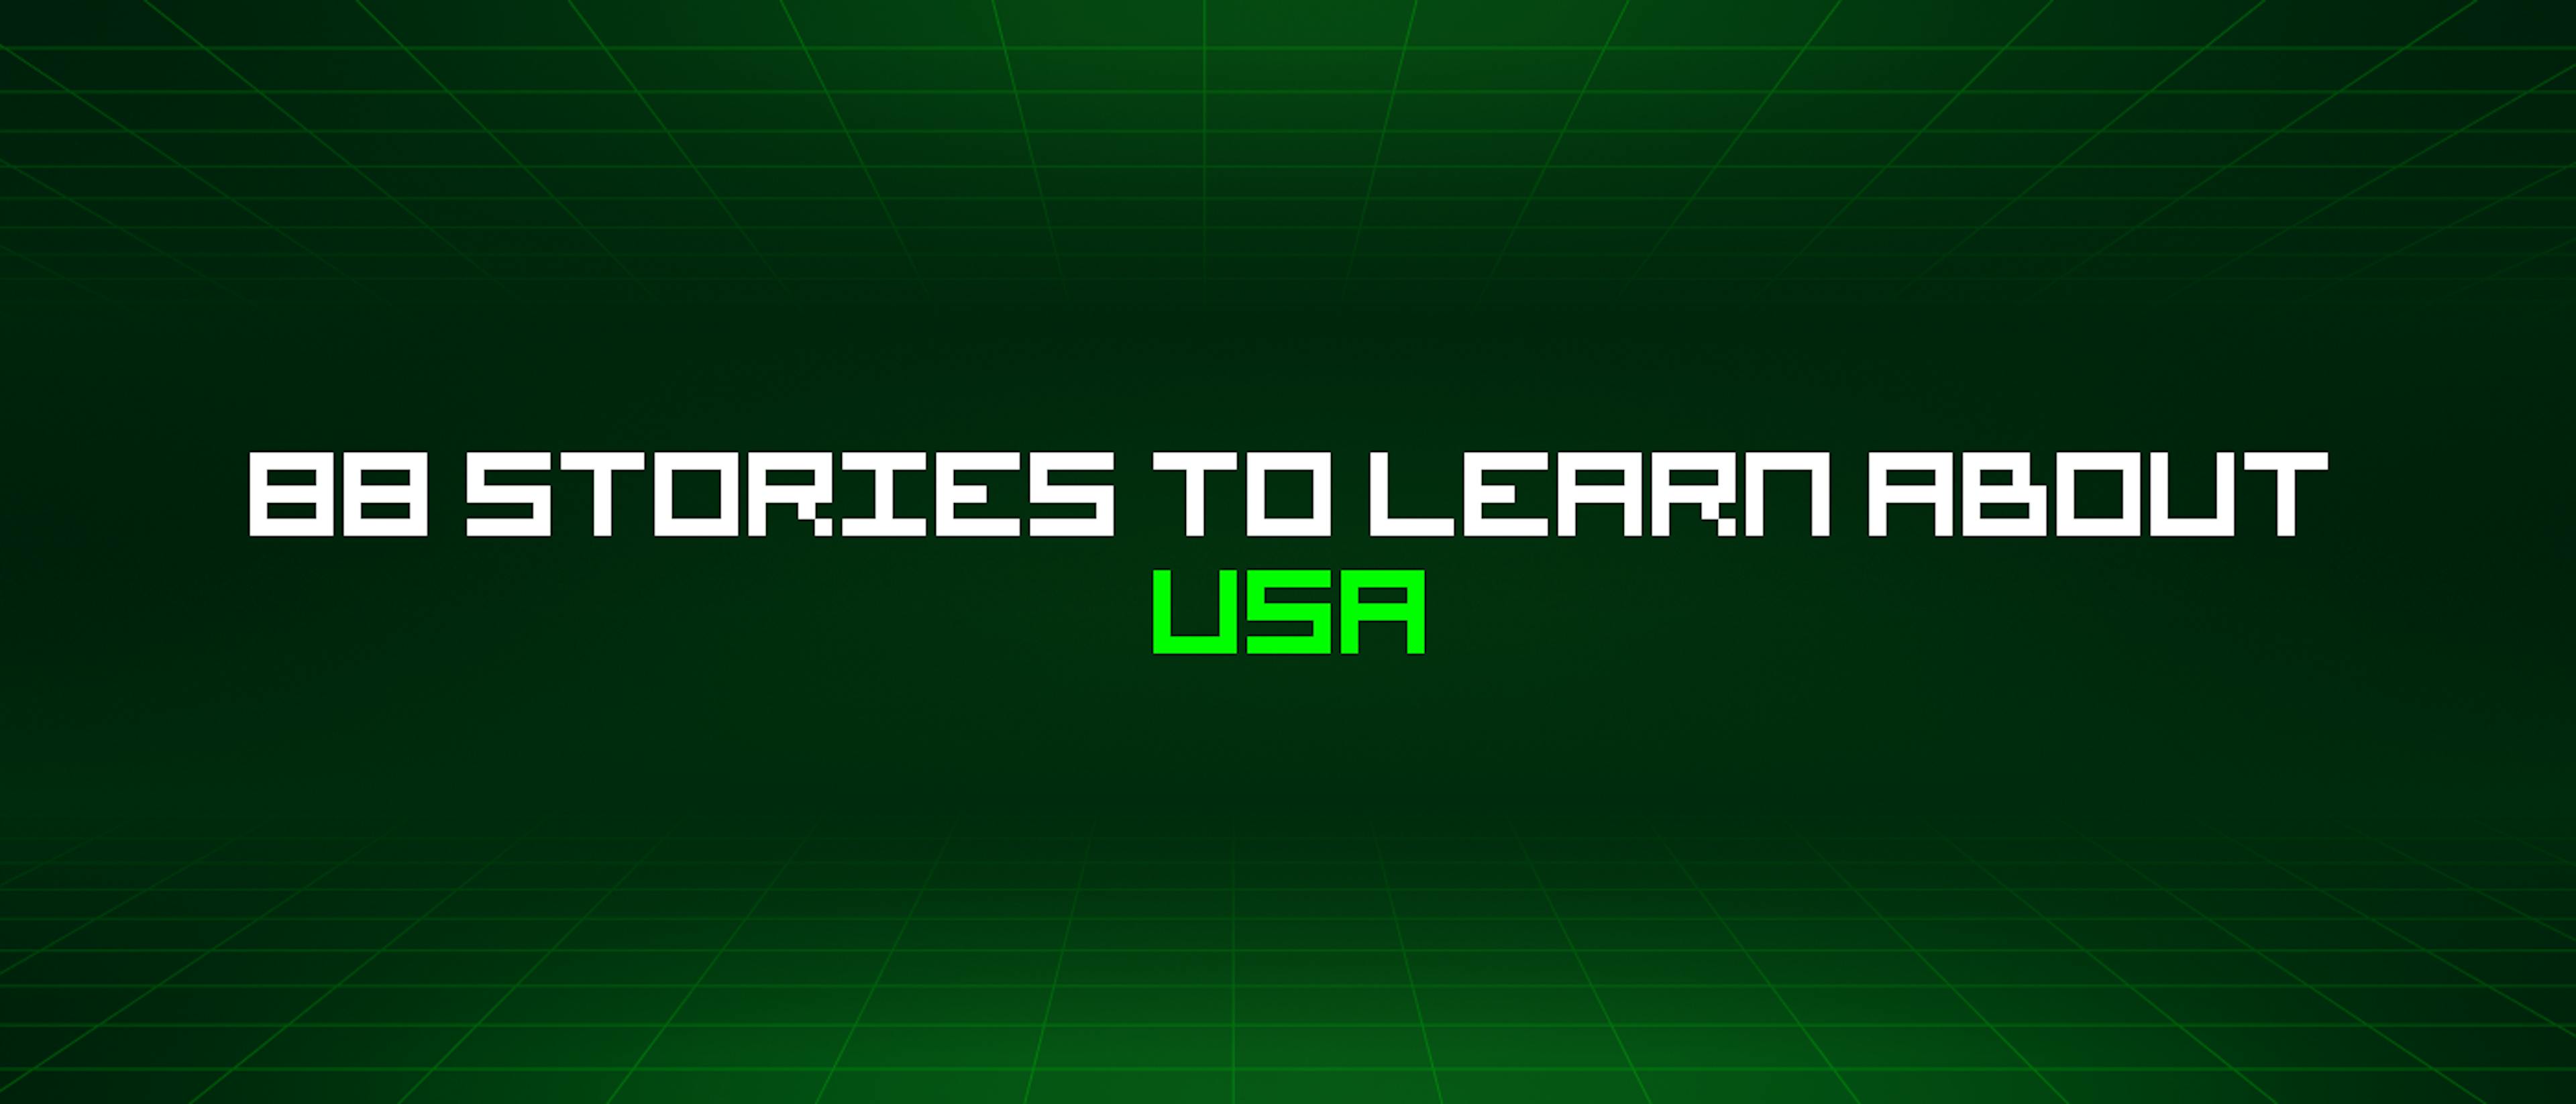 featured image - 88 Stories To Learn About Usa